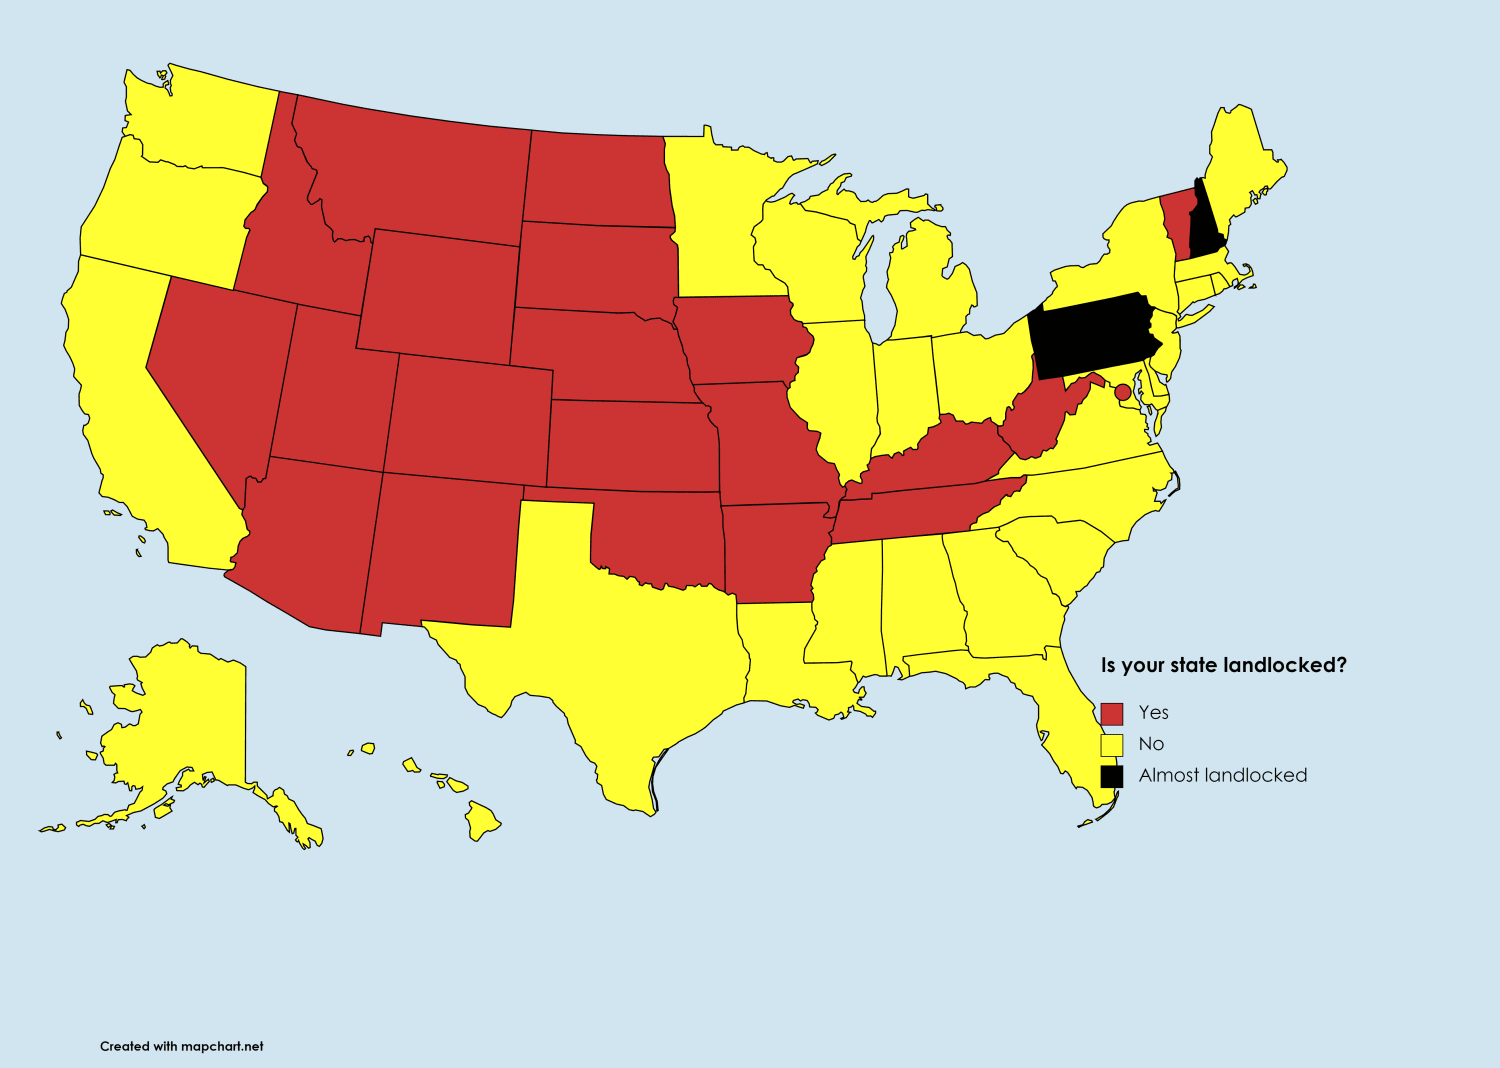 Is your state landlocked? (Be aware that mexico and canada are blocking some of the northern and southern states)